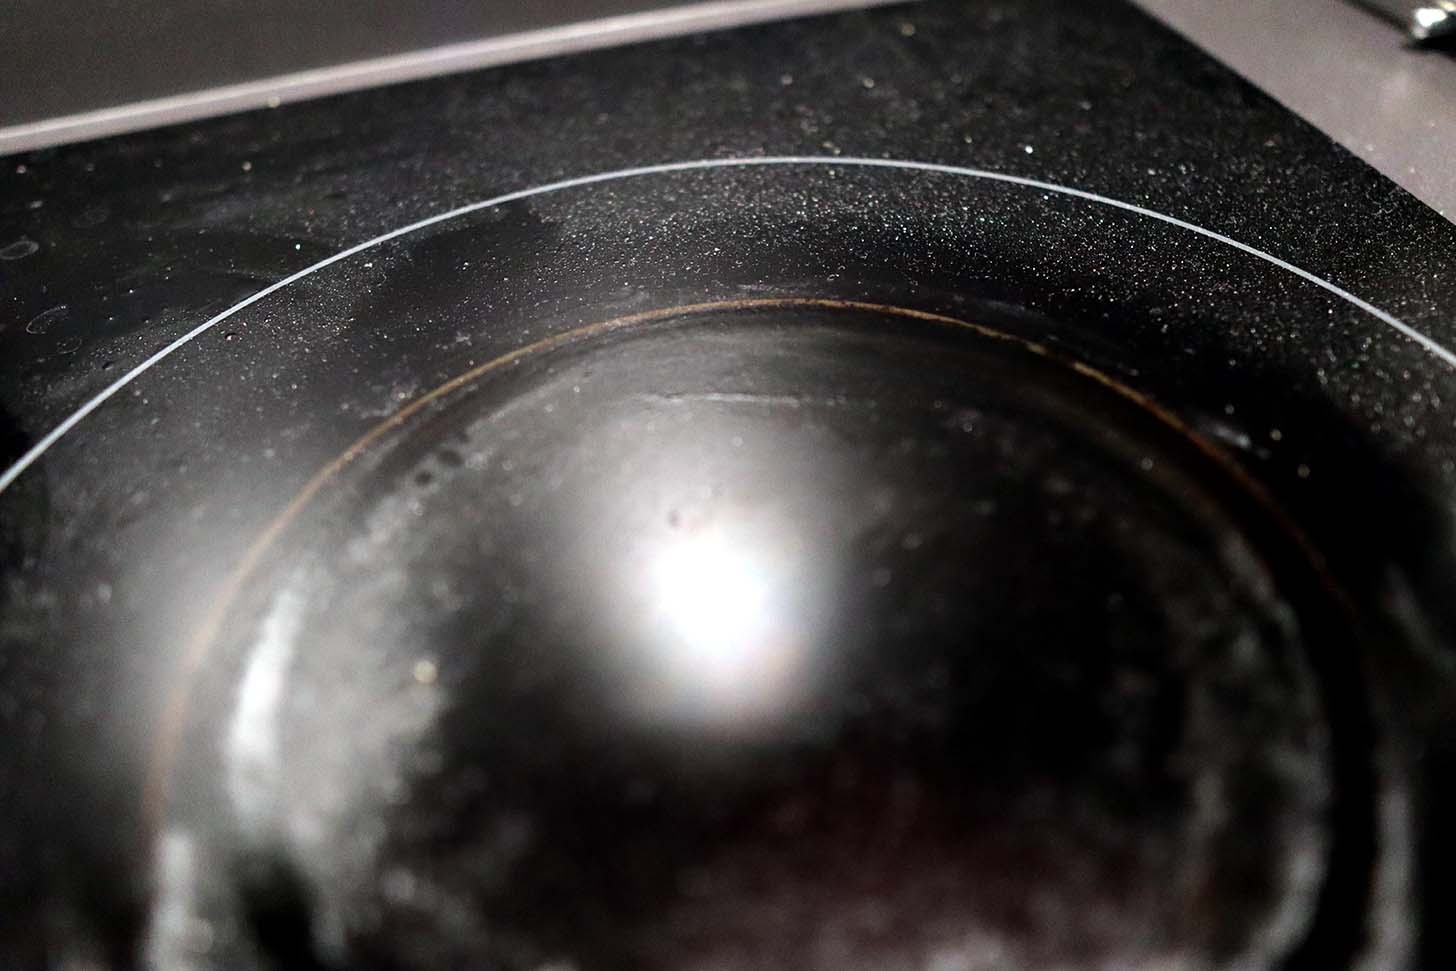 A photo of the stains left on my induction cooktop after cooking with a cast iron skillet with an oily underside.